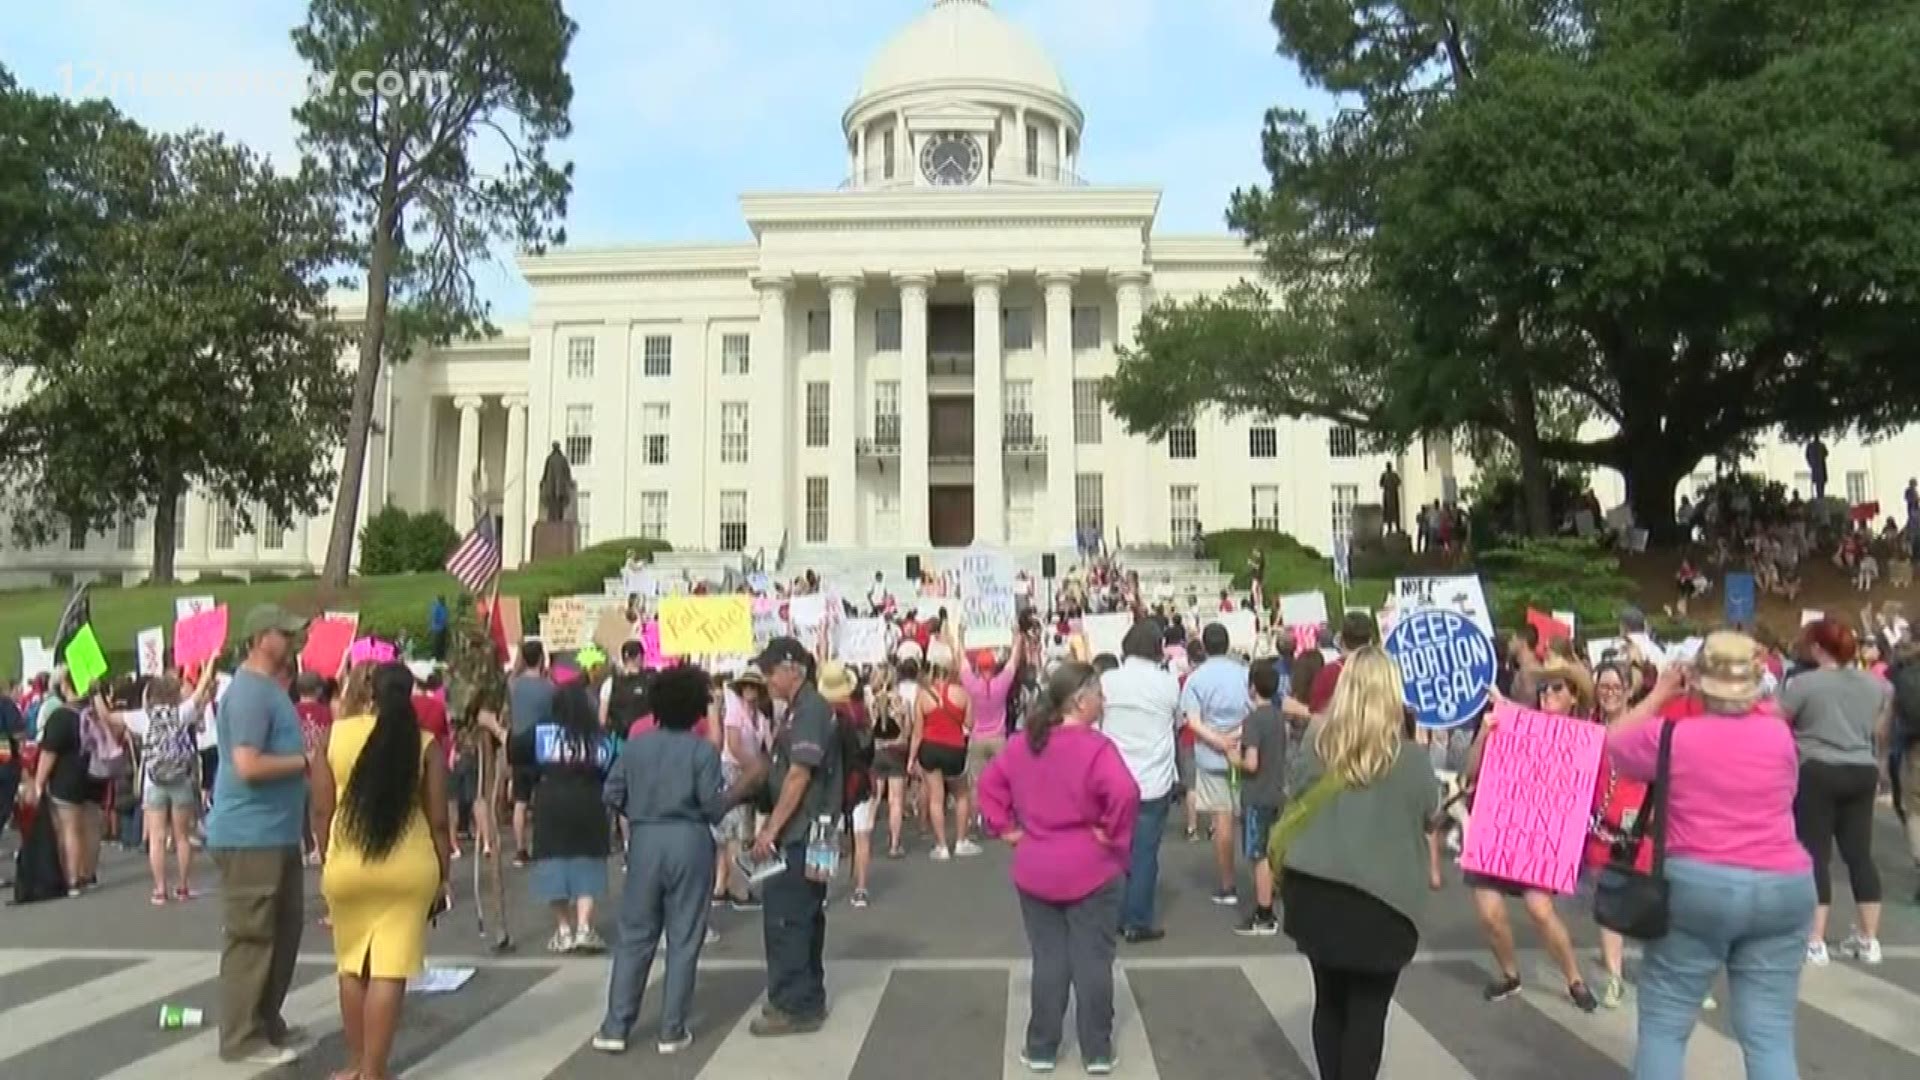 In Alabama, protesters took to the streets over the strict abortion ban passed last week. Rallies were held in five different areas including Montgomery and Birmingham. In Montgomery, hundreds of people marched to the Capitol steps. Organizers say the large turnout proves people do not feel represented by the government.